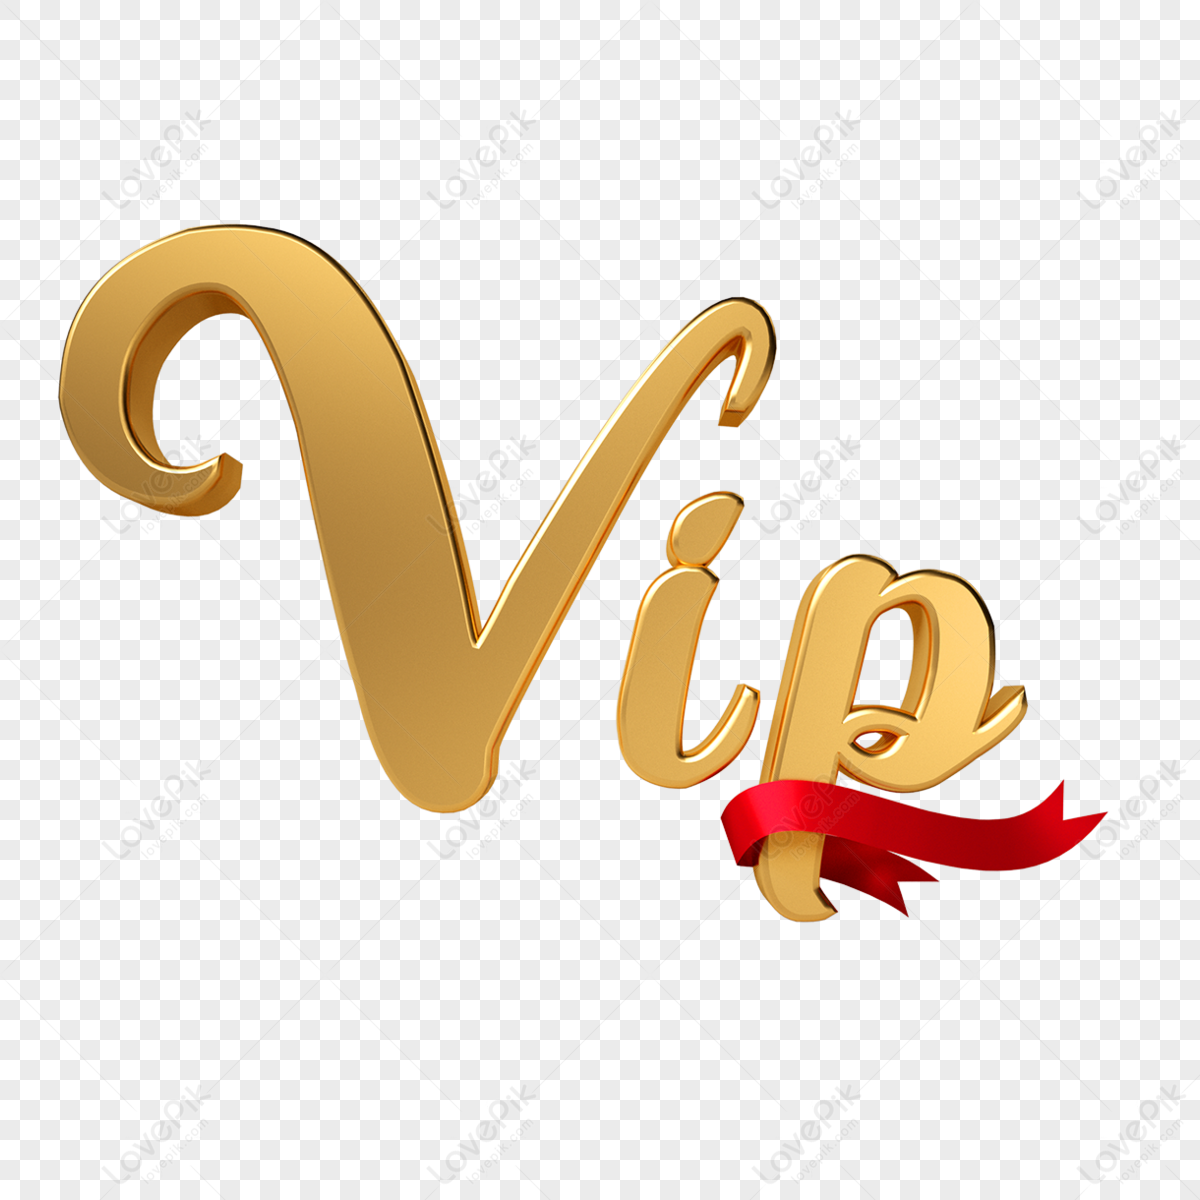 Vip Badge In Gold And Black Round Label Modern Illustration Stock  Illustration - Download Image Now - iStock